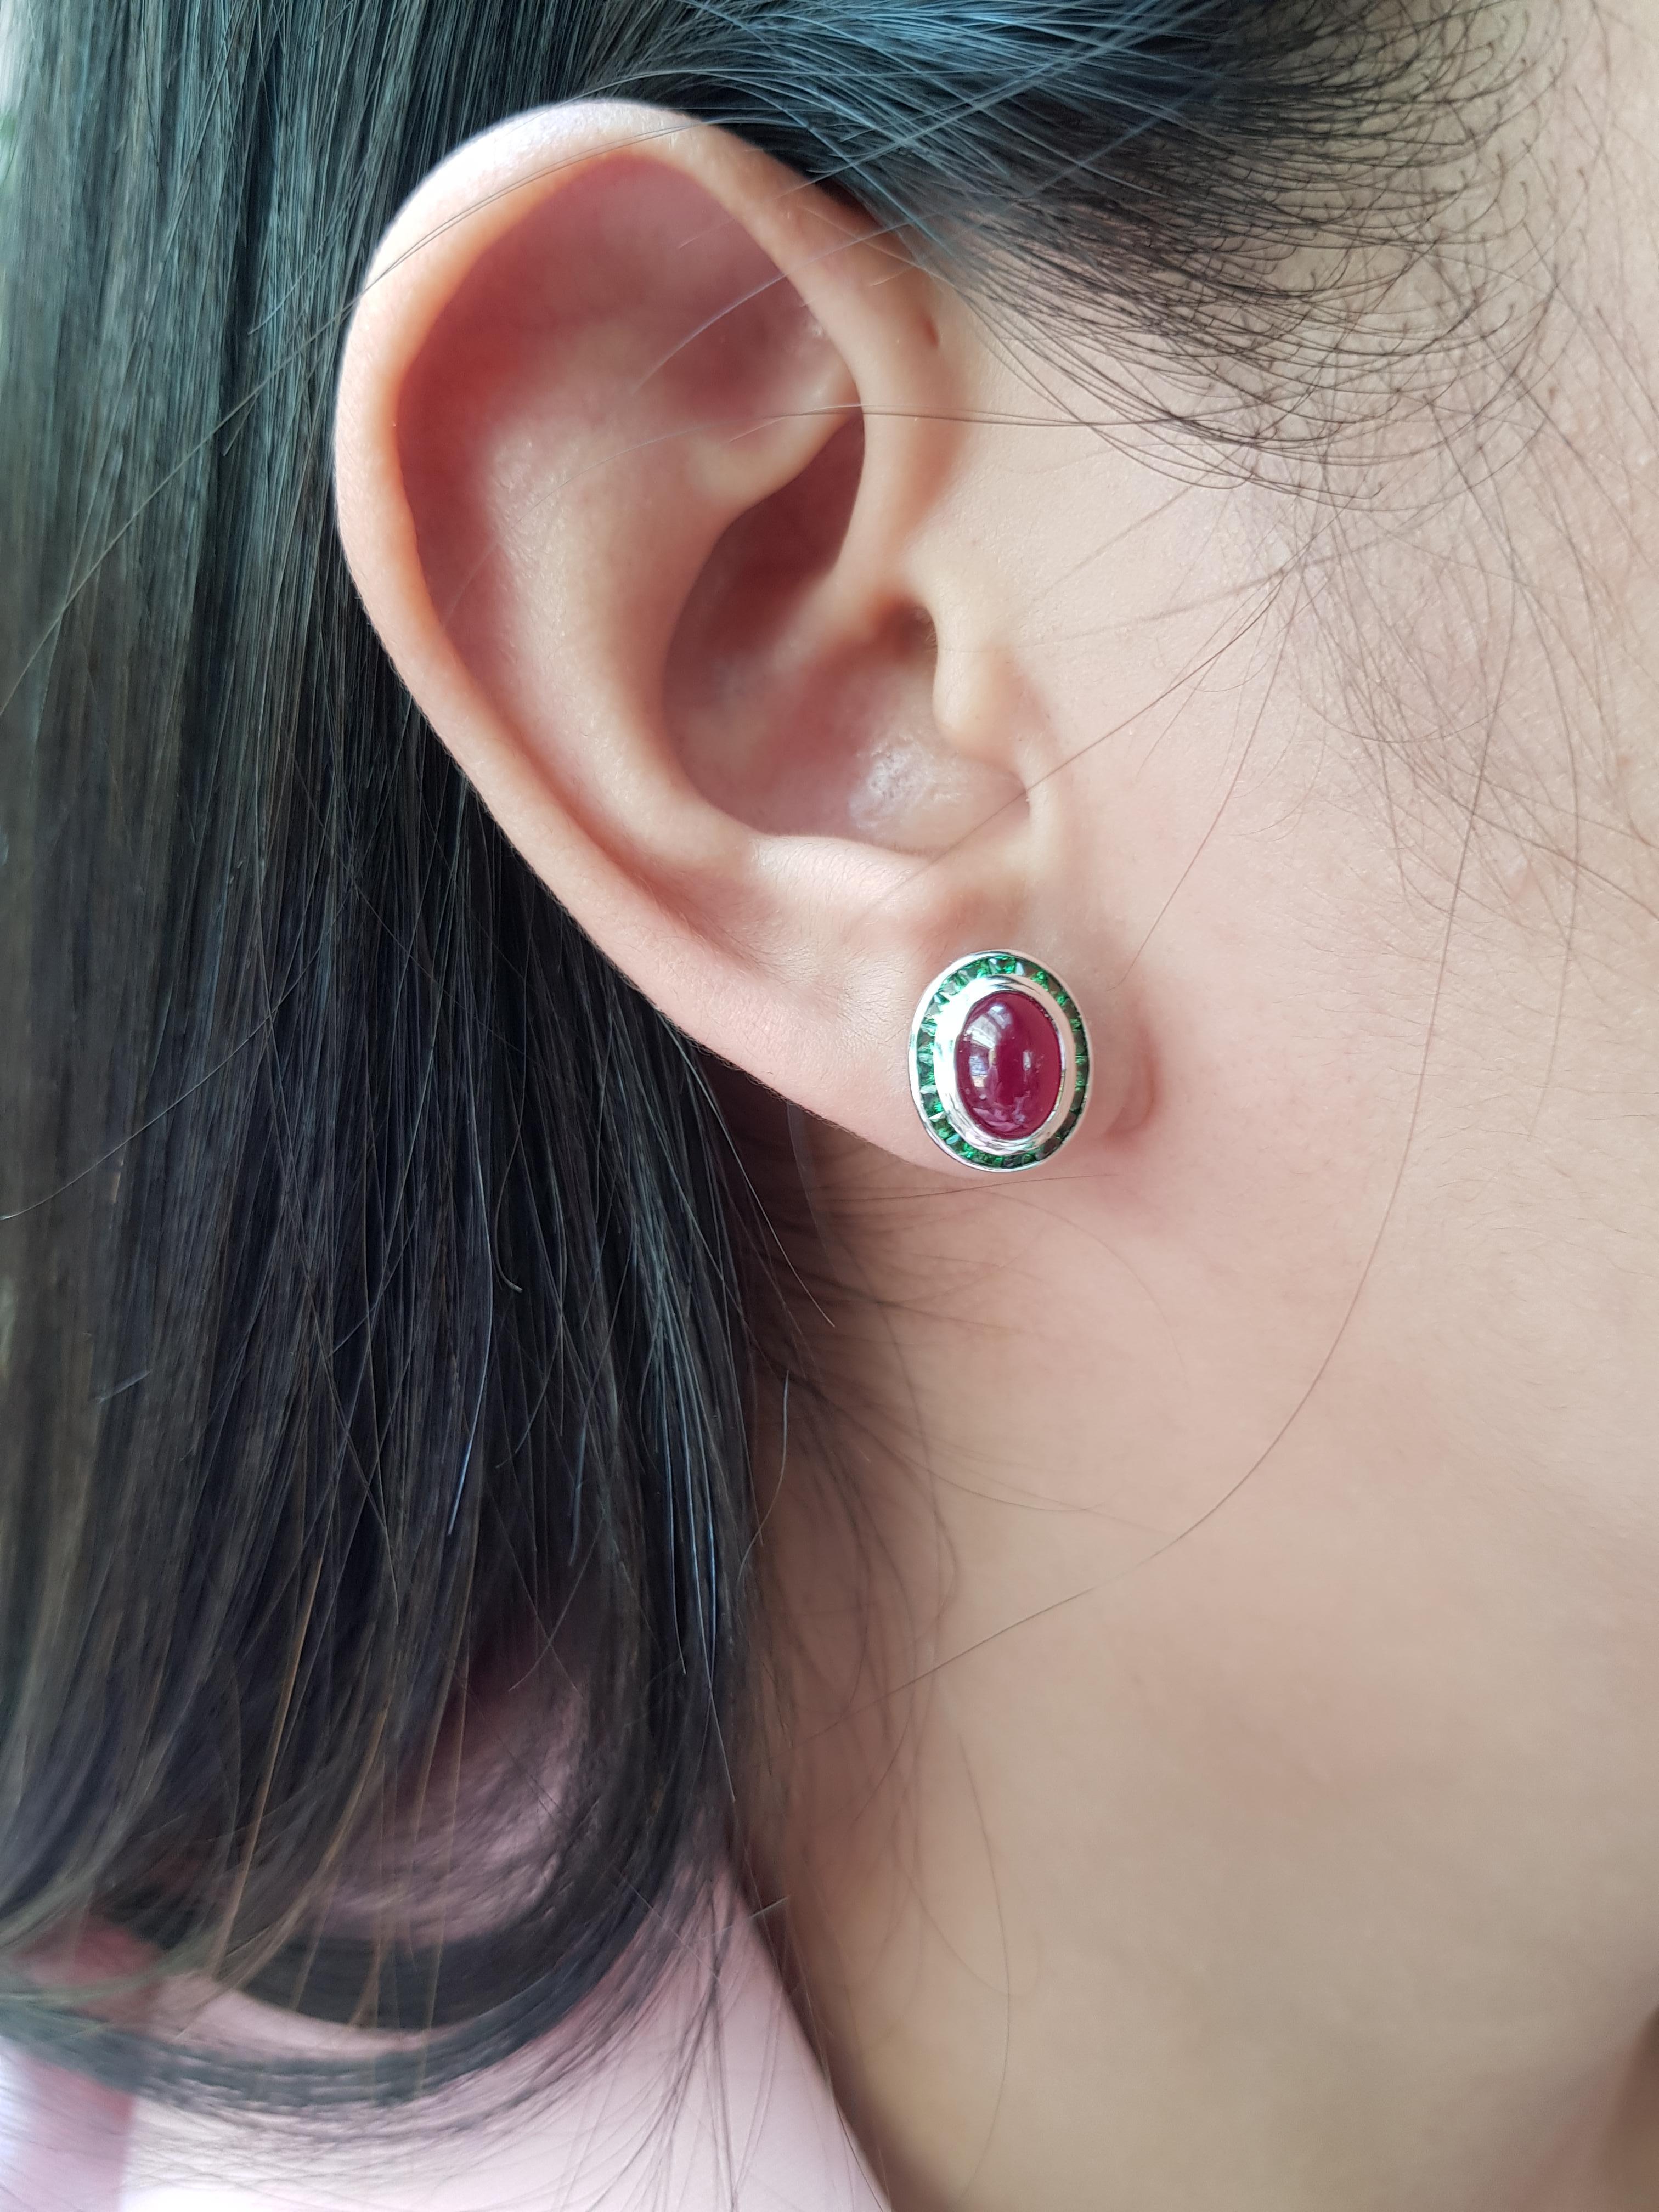 Cabochon Ruby 3.77 carats with Tsavorite 1.49 carats Earrings set in 18 Karat White Gold Settings

Width: 1.0 cm
Length: 1.3 cm 

